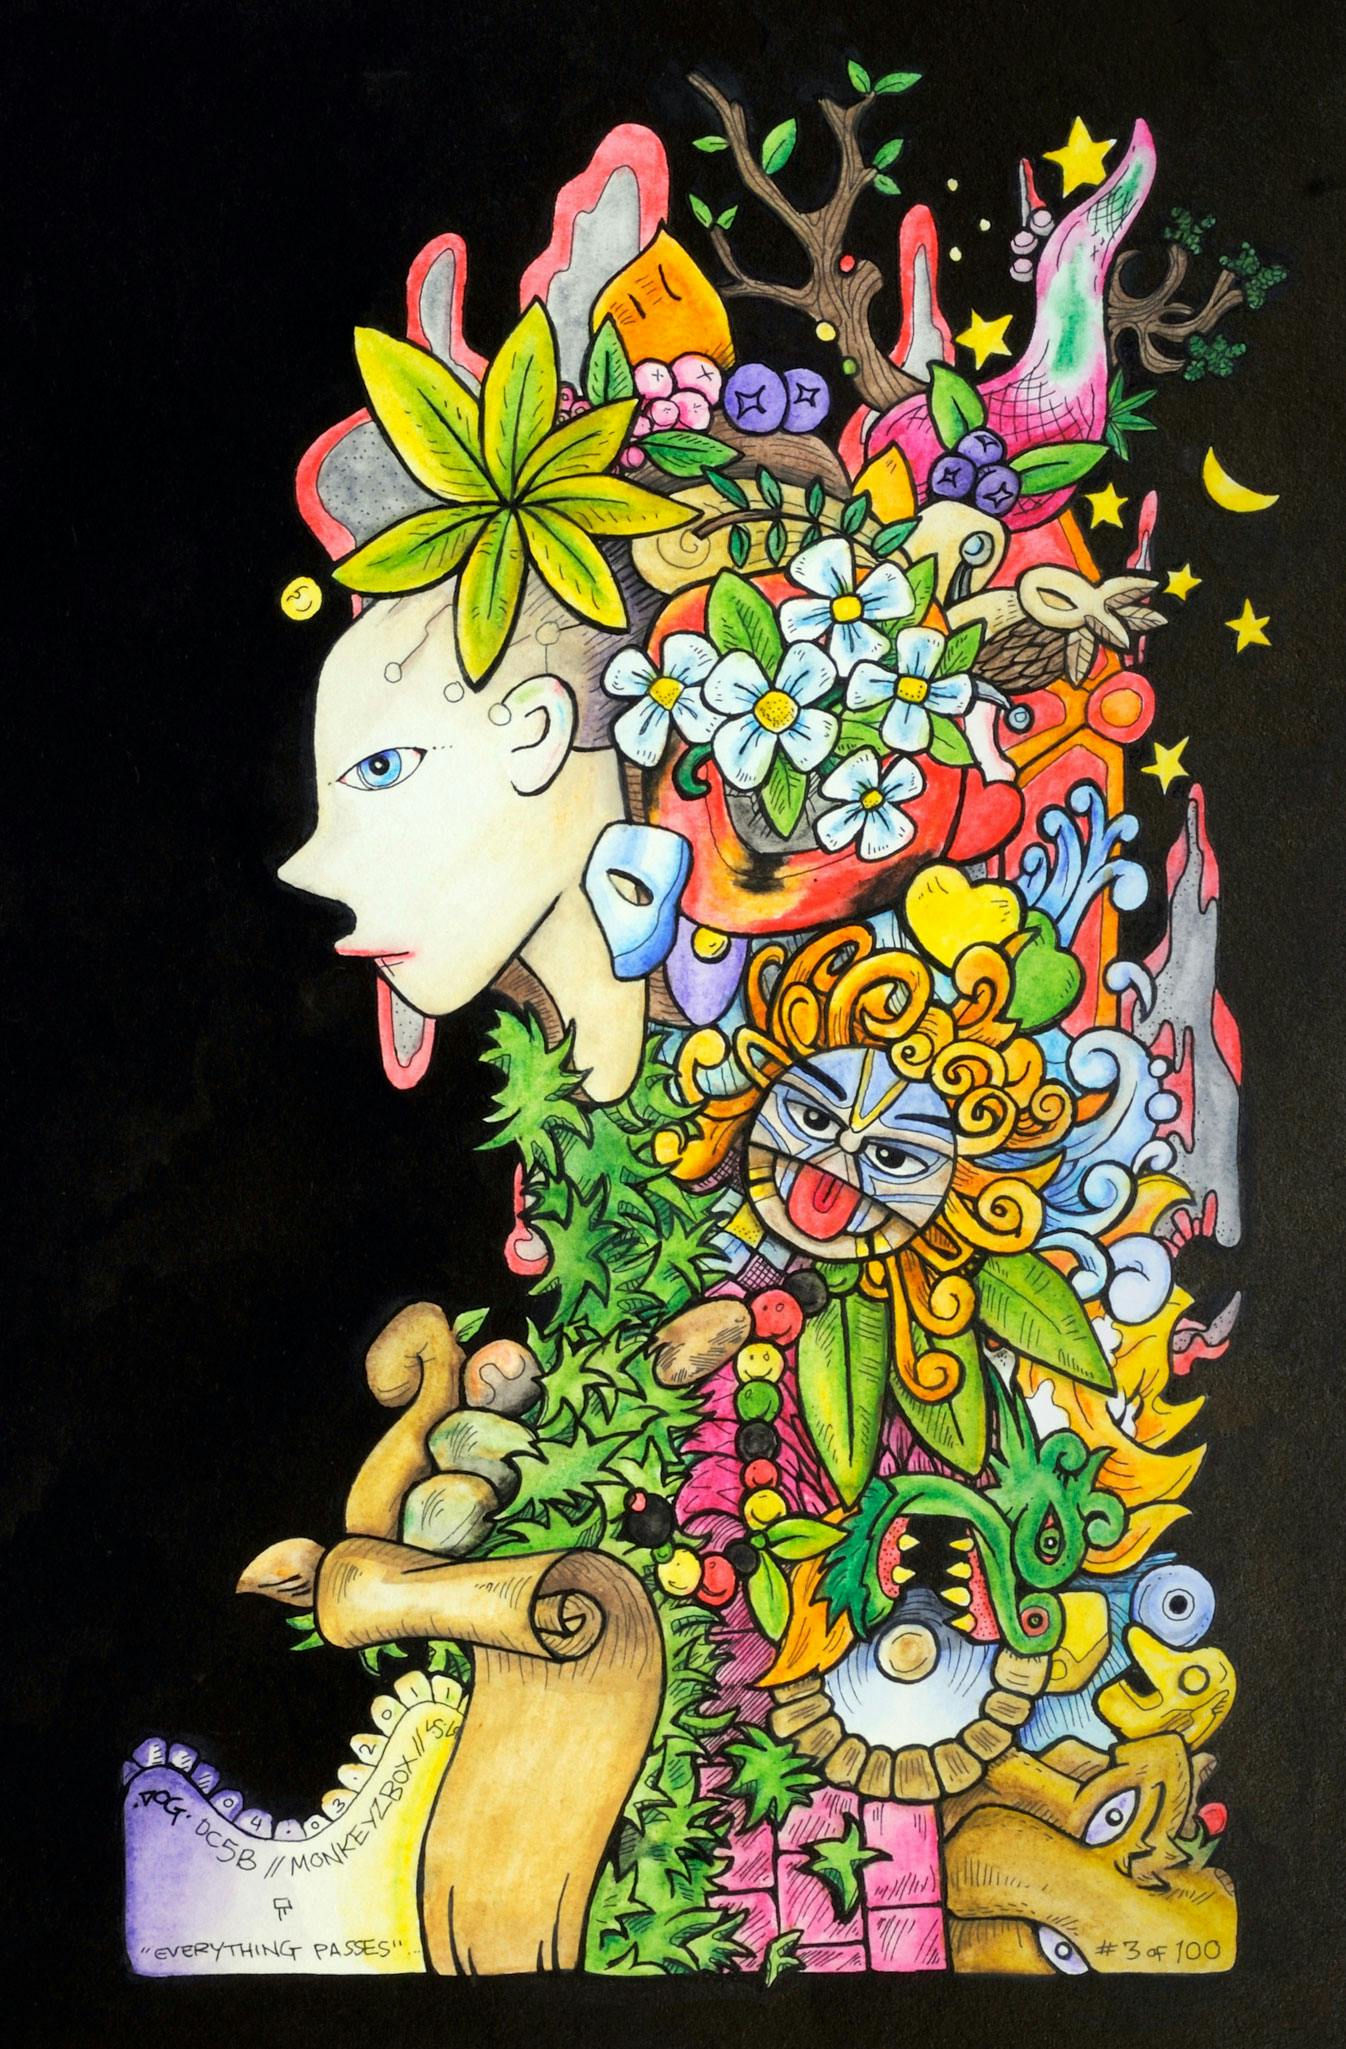 Artwork background with colourful flowers, hearts and faces on a black background